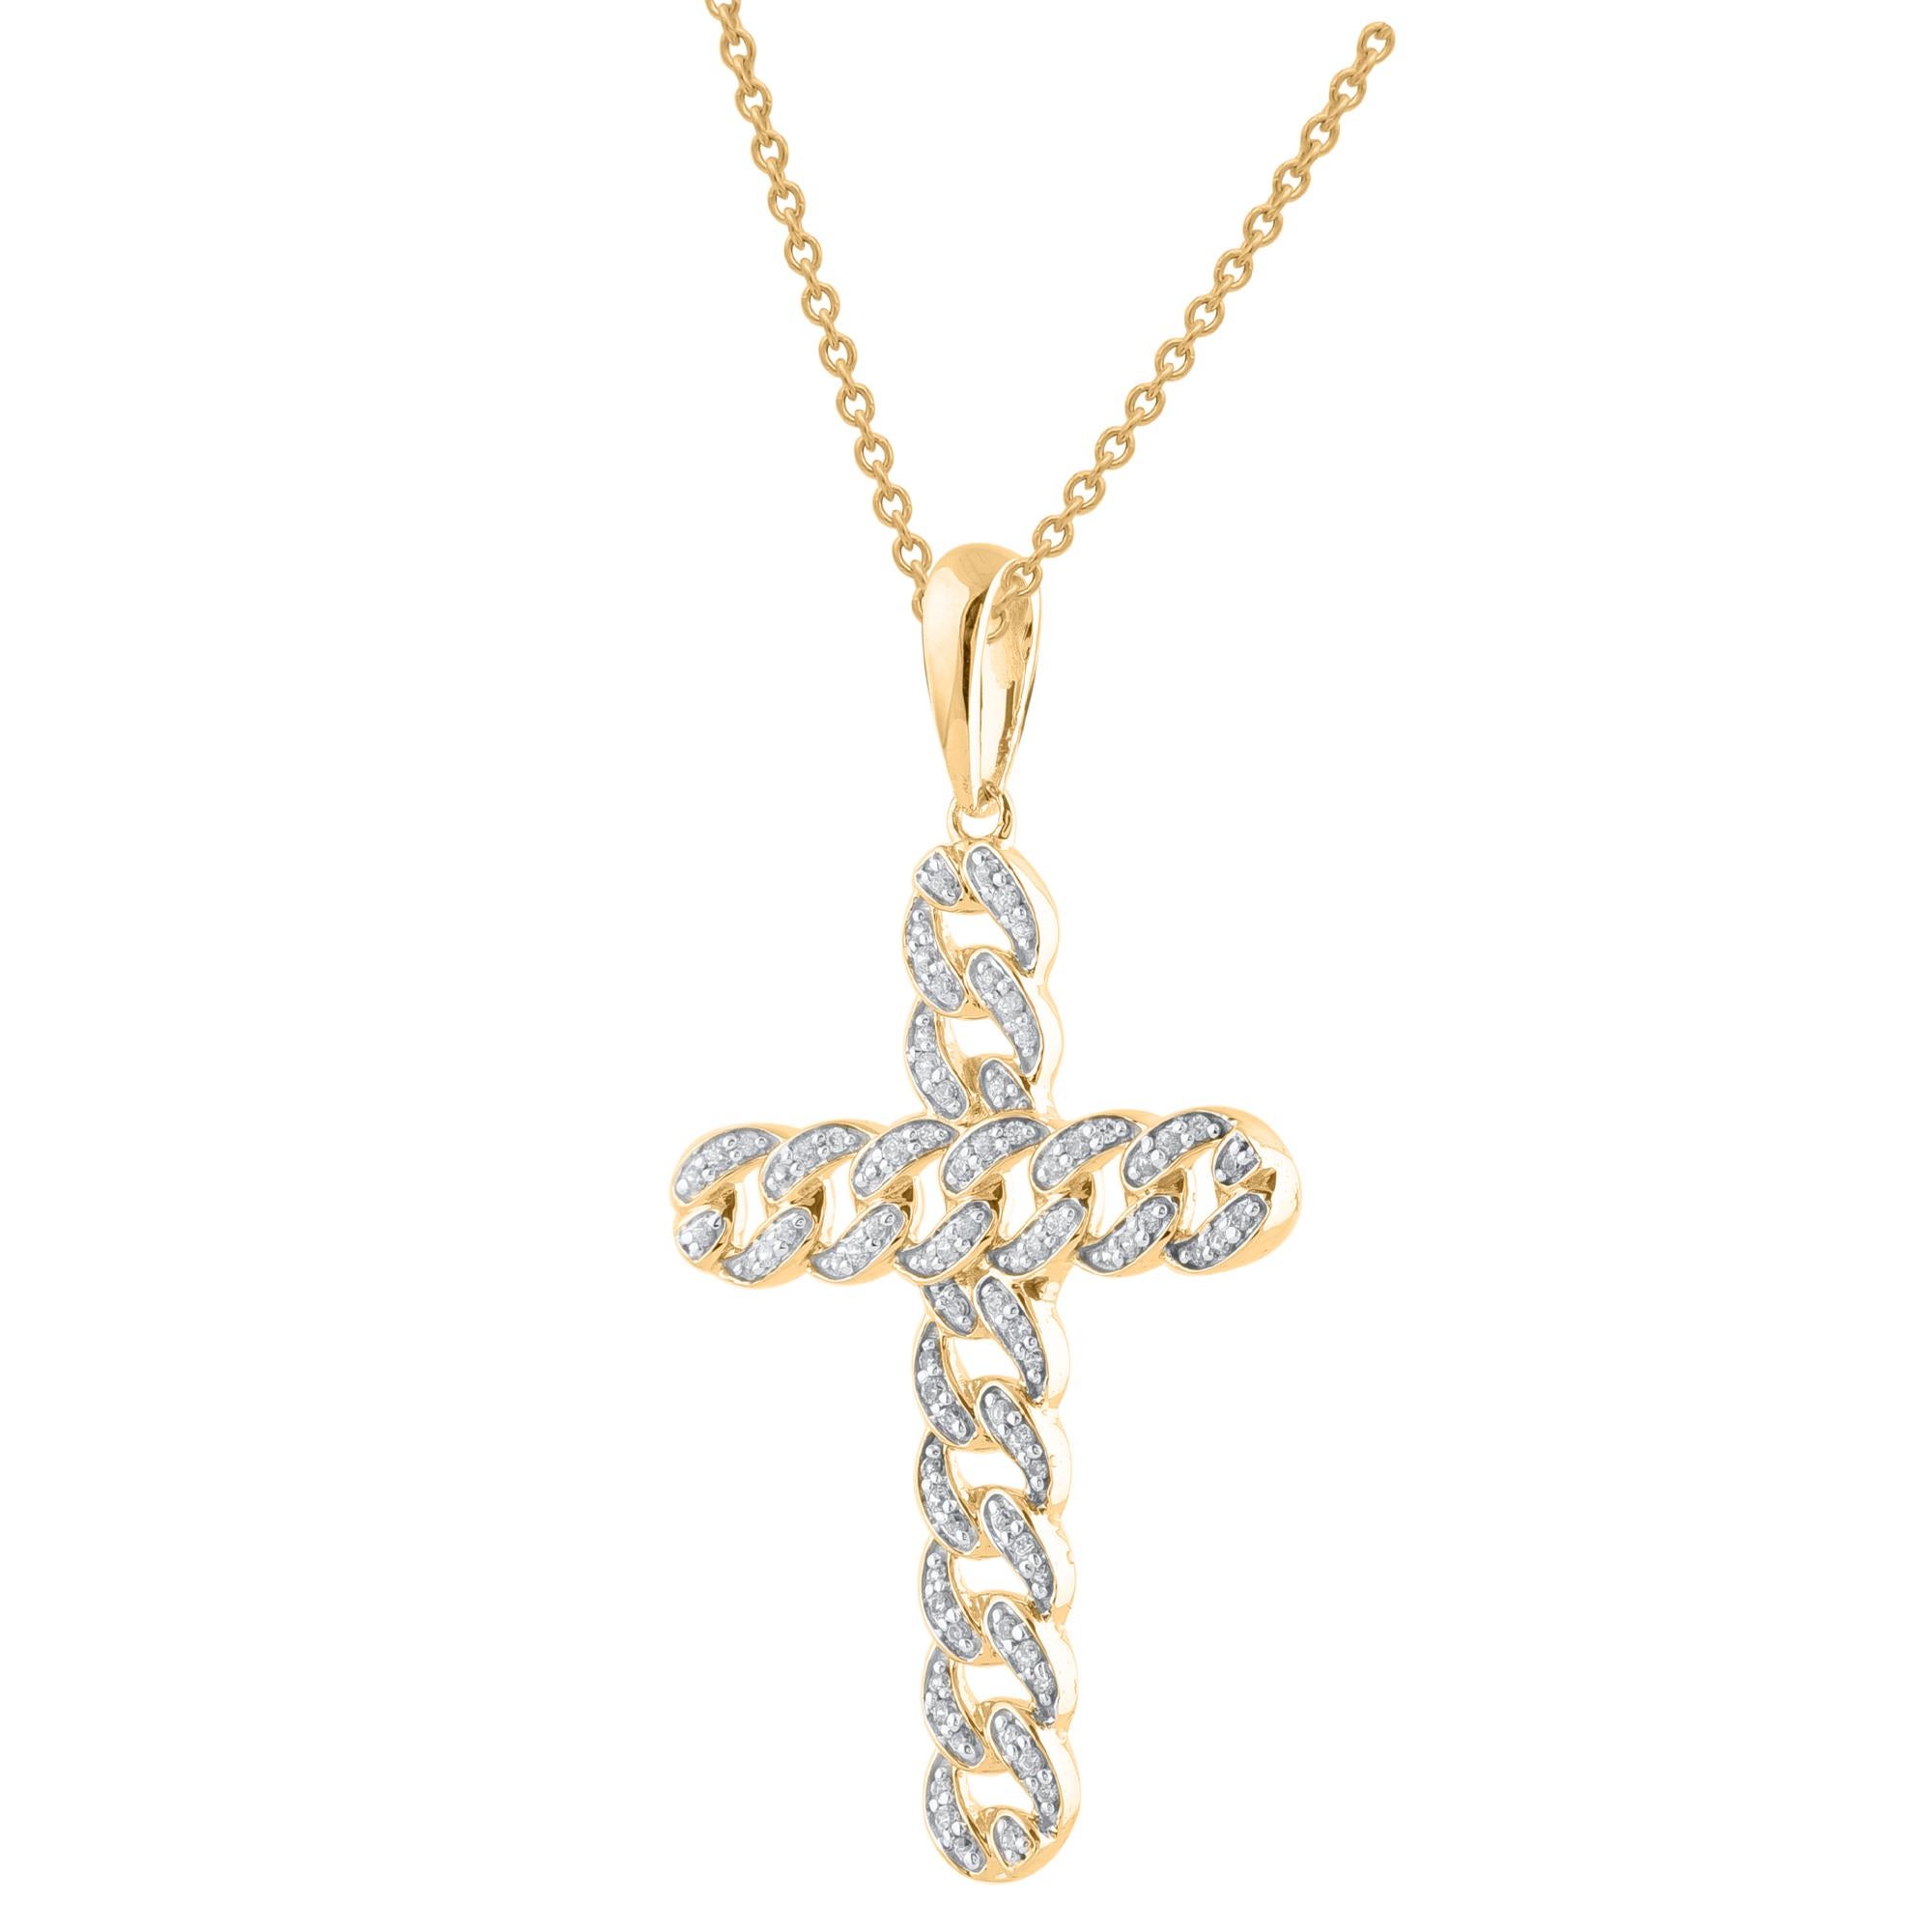 Make a bold statement of style and beliefs with the eye-catching elegance of this diamond cross pendant.  Beautifully crafted by our inhouse experts in 18 karat yellow gold and embellished with 84 round diamond set in pave setting. The total diamond